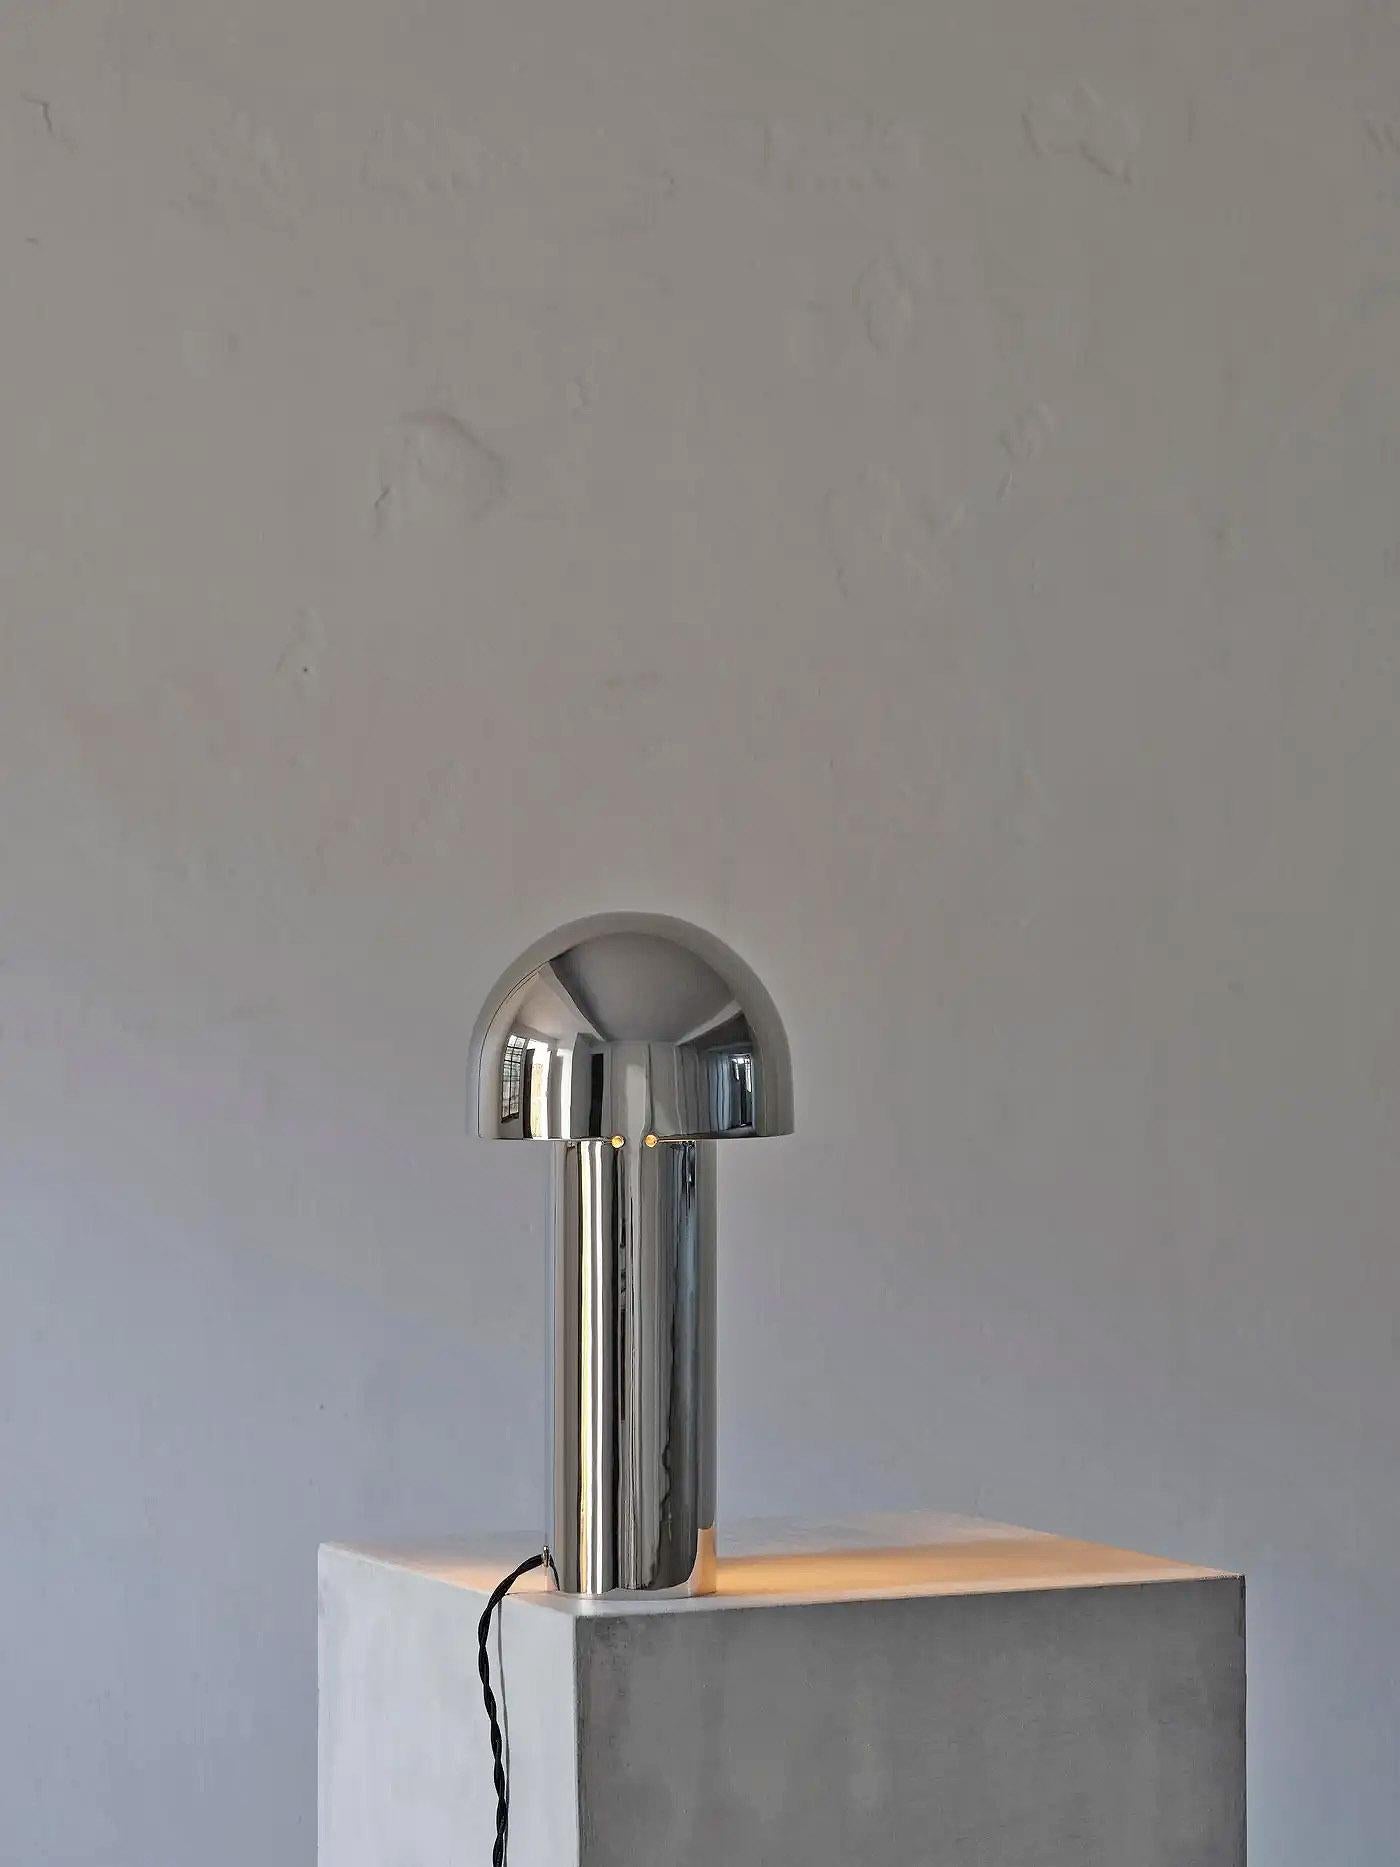 Contemporary Polished Steel Sculpted Table Lamp, Monolith Small by Paul Matter

The Monolith lamp is an exercise in reduction. Sculpted out of a single body with the help of simple scores and folds, the lamps geometry, surface texture and finish of